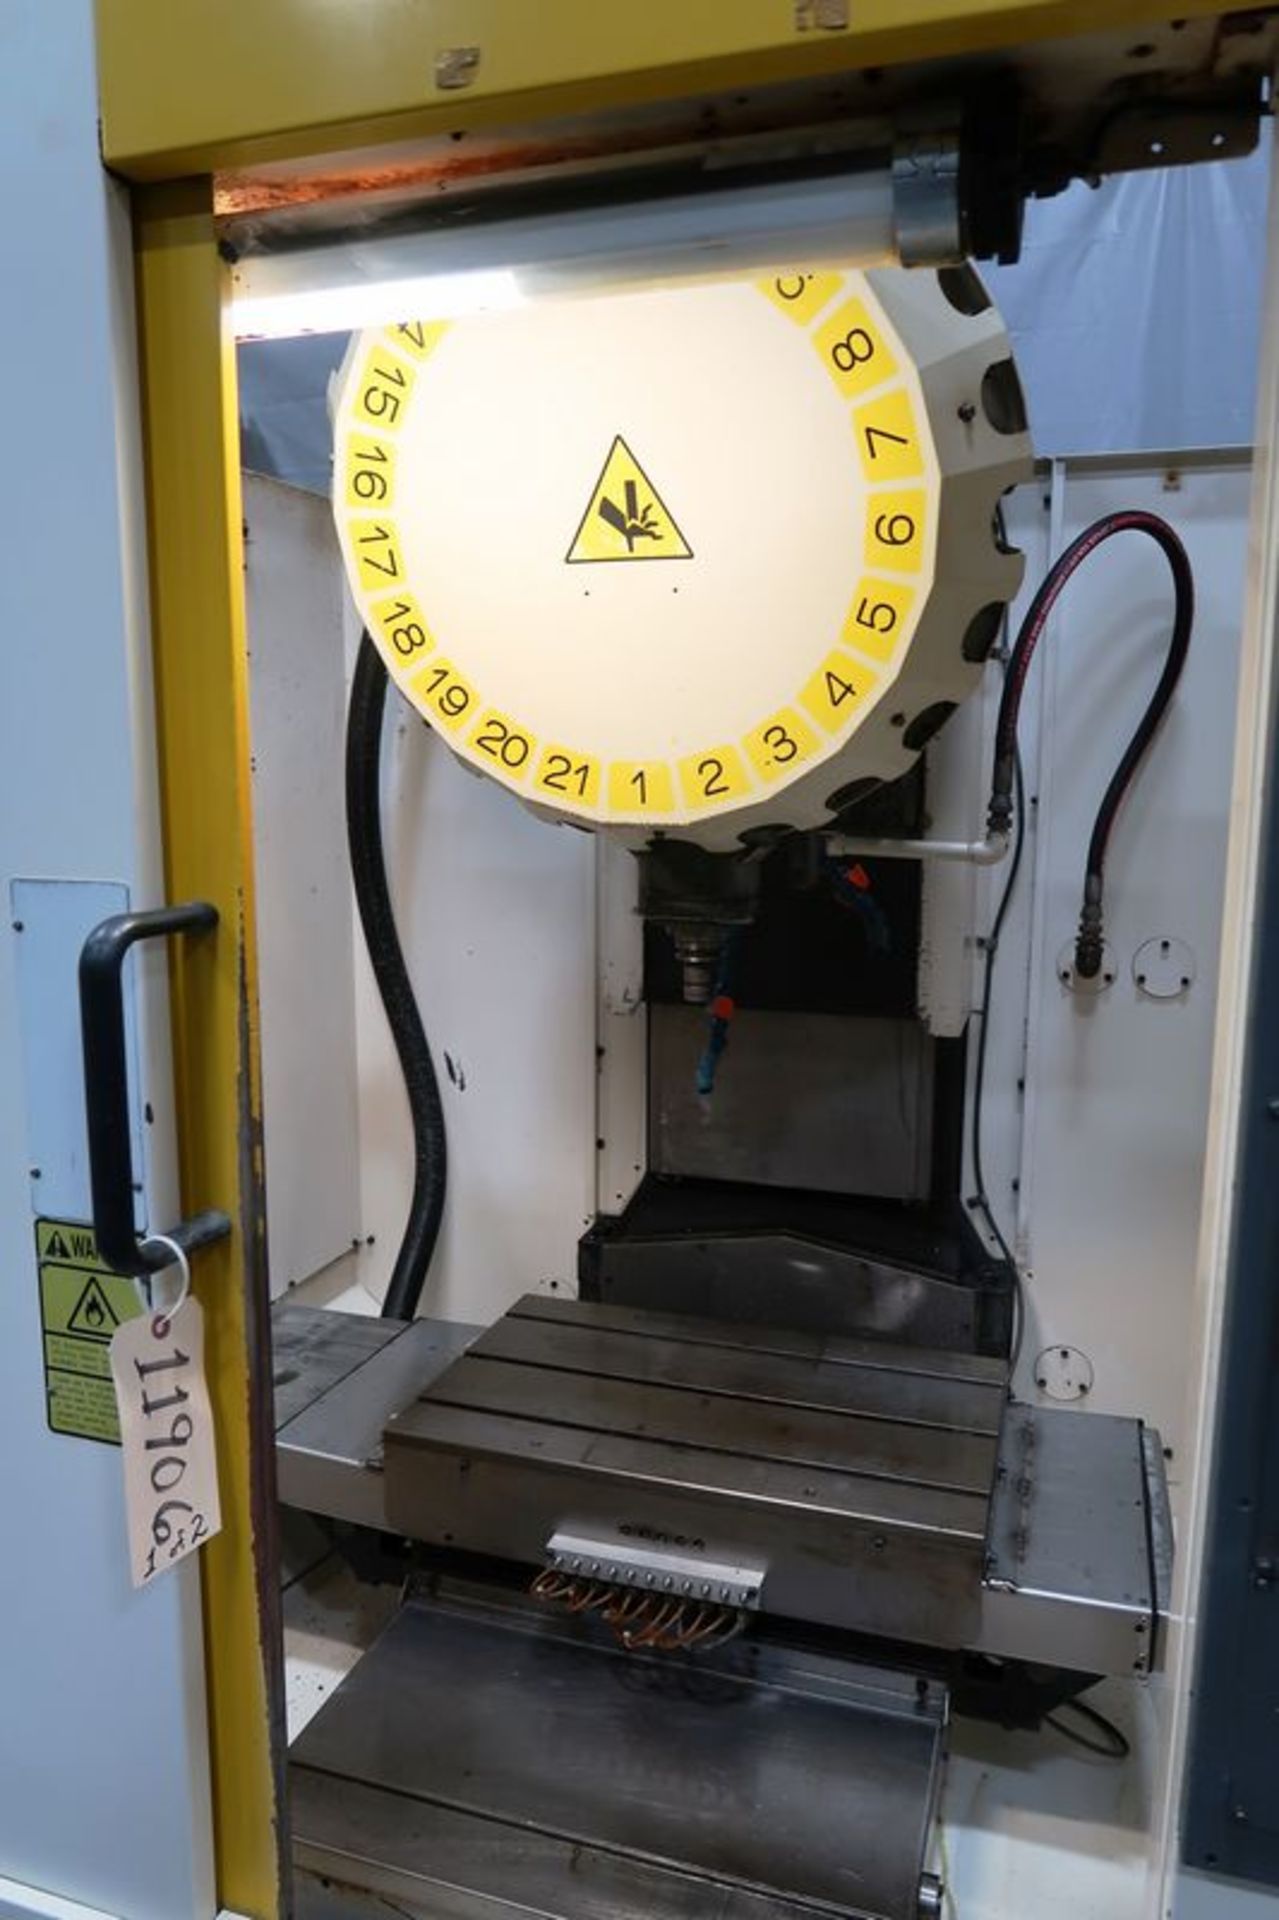 2005 Fanuc Robodrill Alpha T21iDE 3-Axis Vertical High Speed Drill Tap Center, S/N PO48UR395 - Image 3 of 11